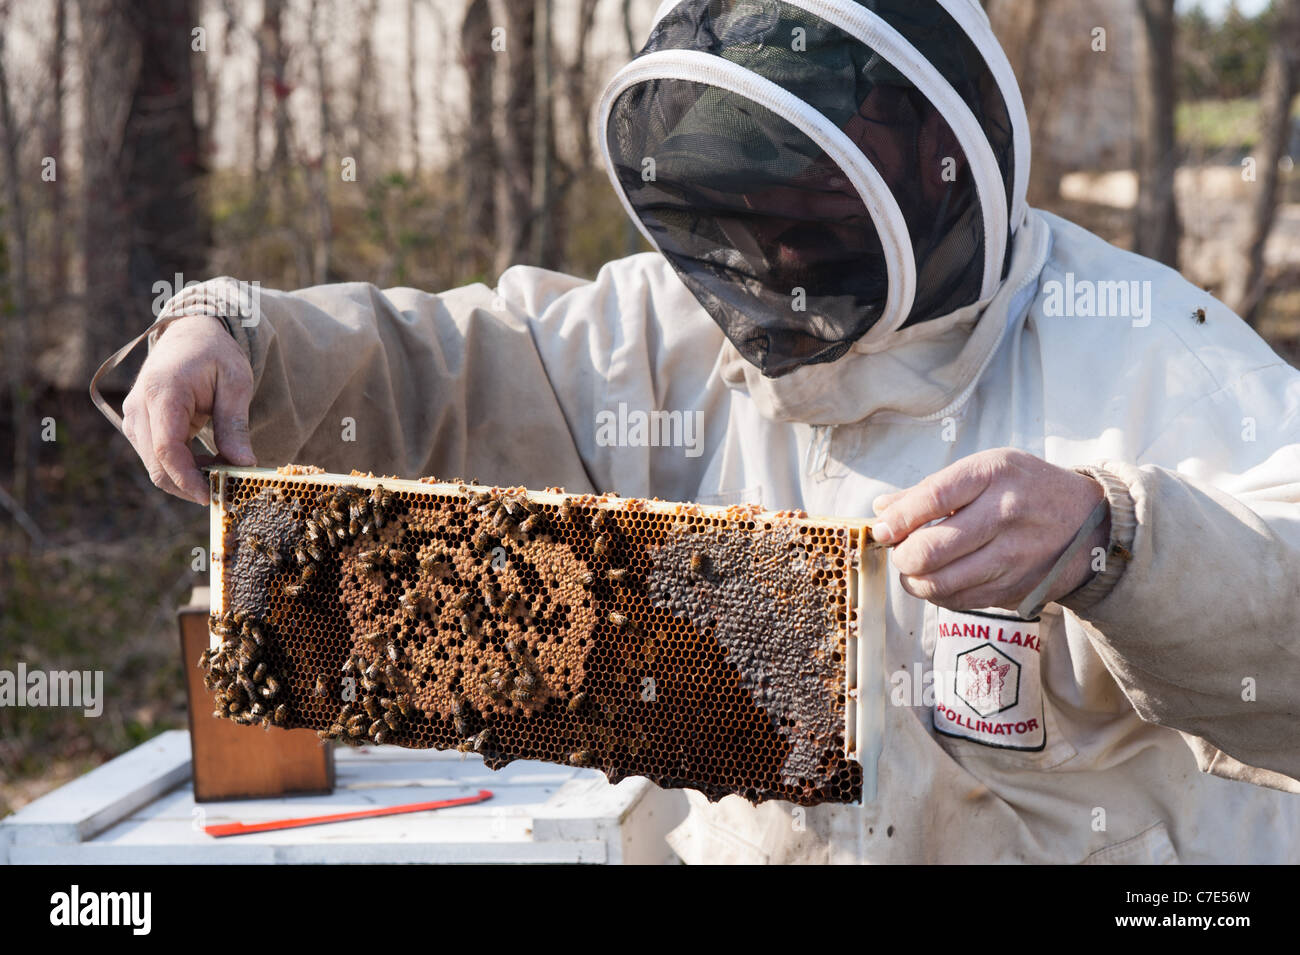 Beekeeper inspecting hives Stock Photo